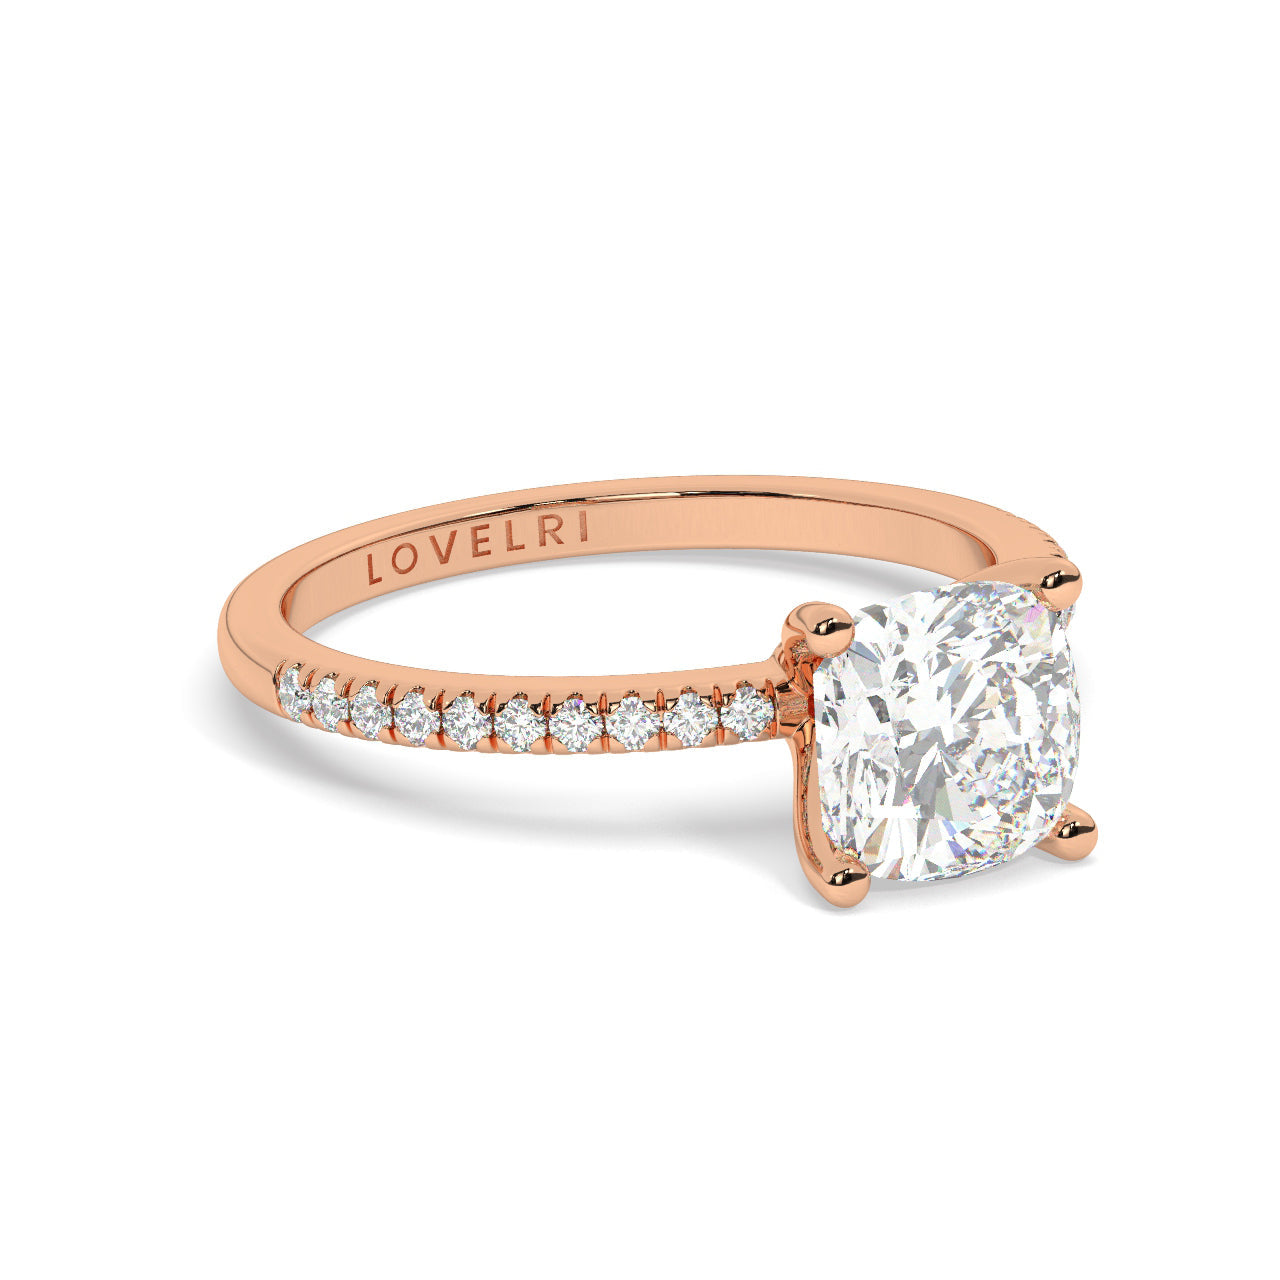 Round Cut Diamond Ring set on a Pavé Band in Rose Gold - Rotated View